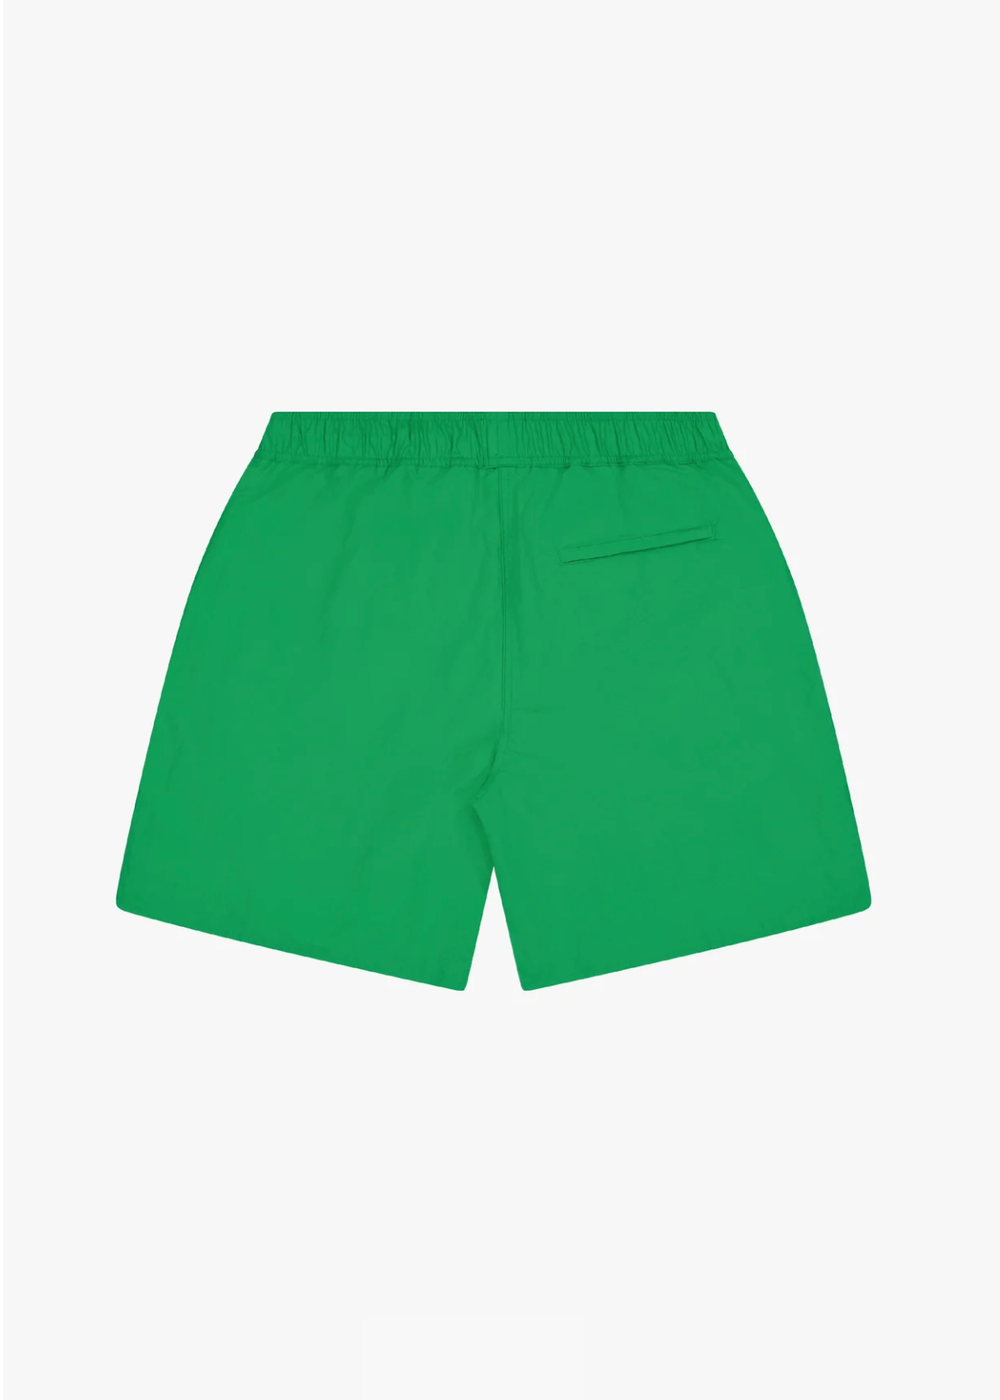 SATURDAY SHORTS HOT GREEN | PORTER JAMES SPORTS | Mad About The Boy